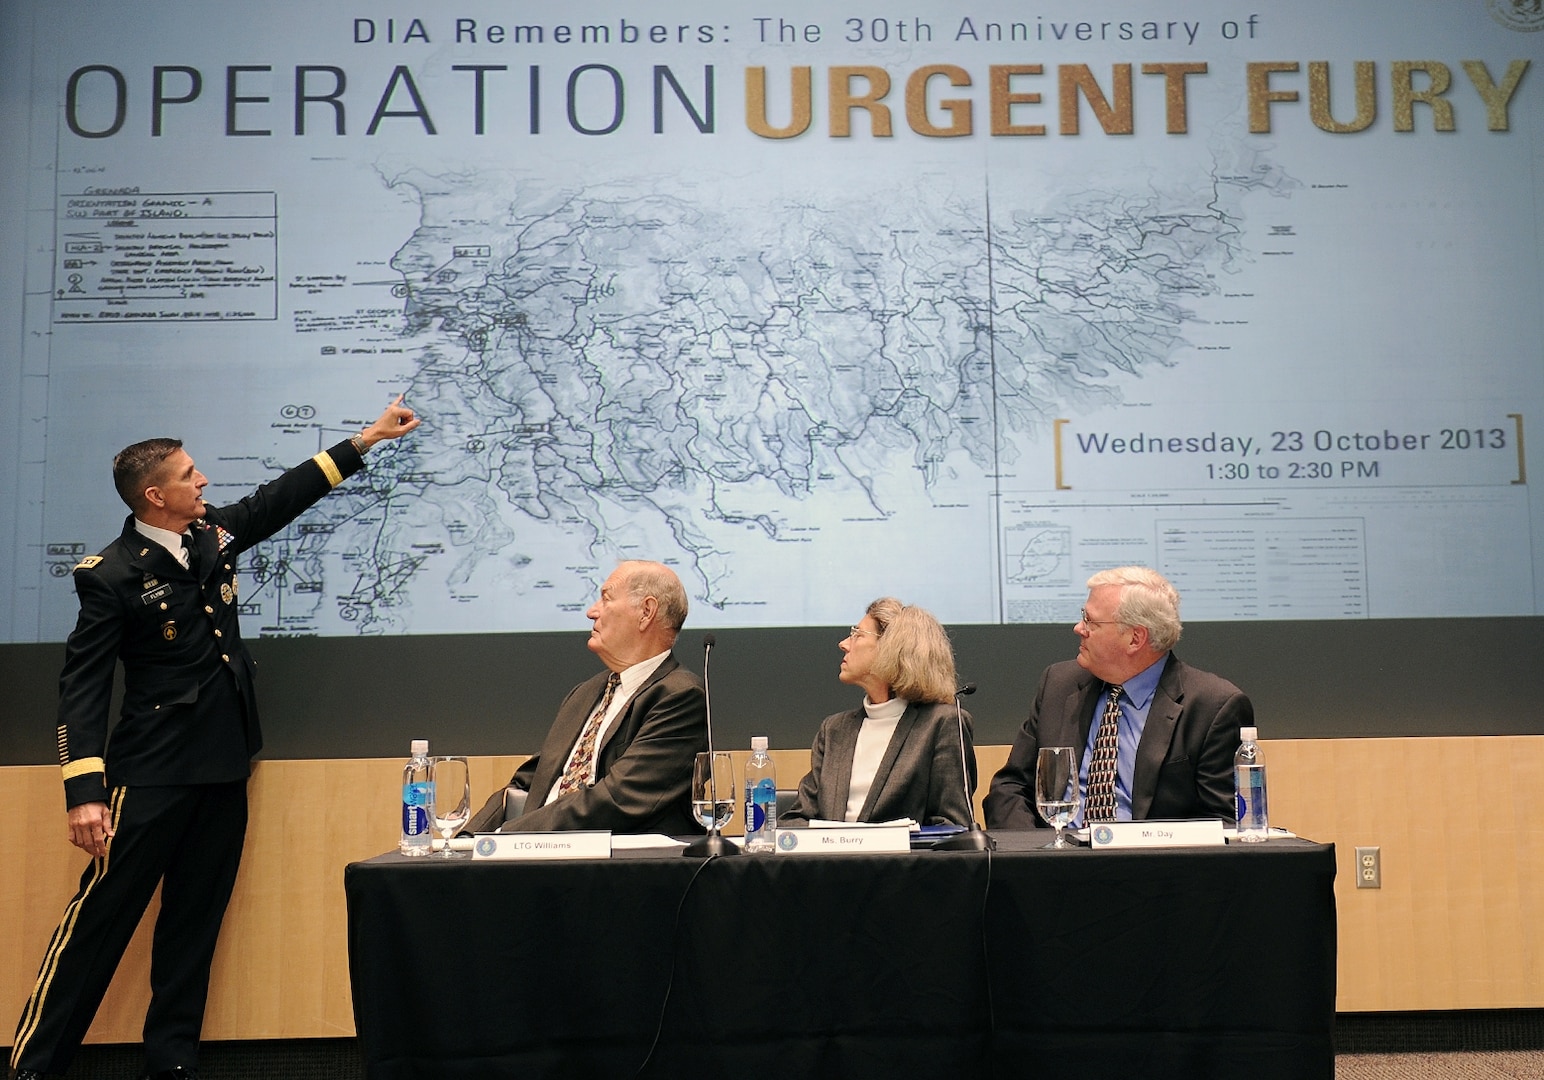 DIA Director LTG Michael Flynn annotates key positions on a map while sharing his experience and role in Operation Urgent Fury during the 30-year anniversary commemoration event Oct. 23.